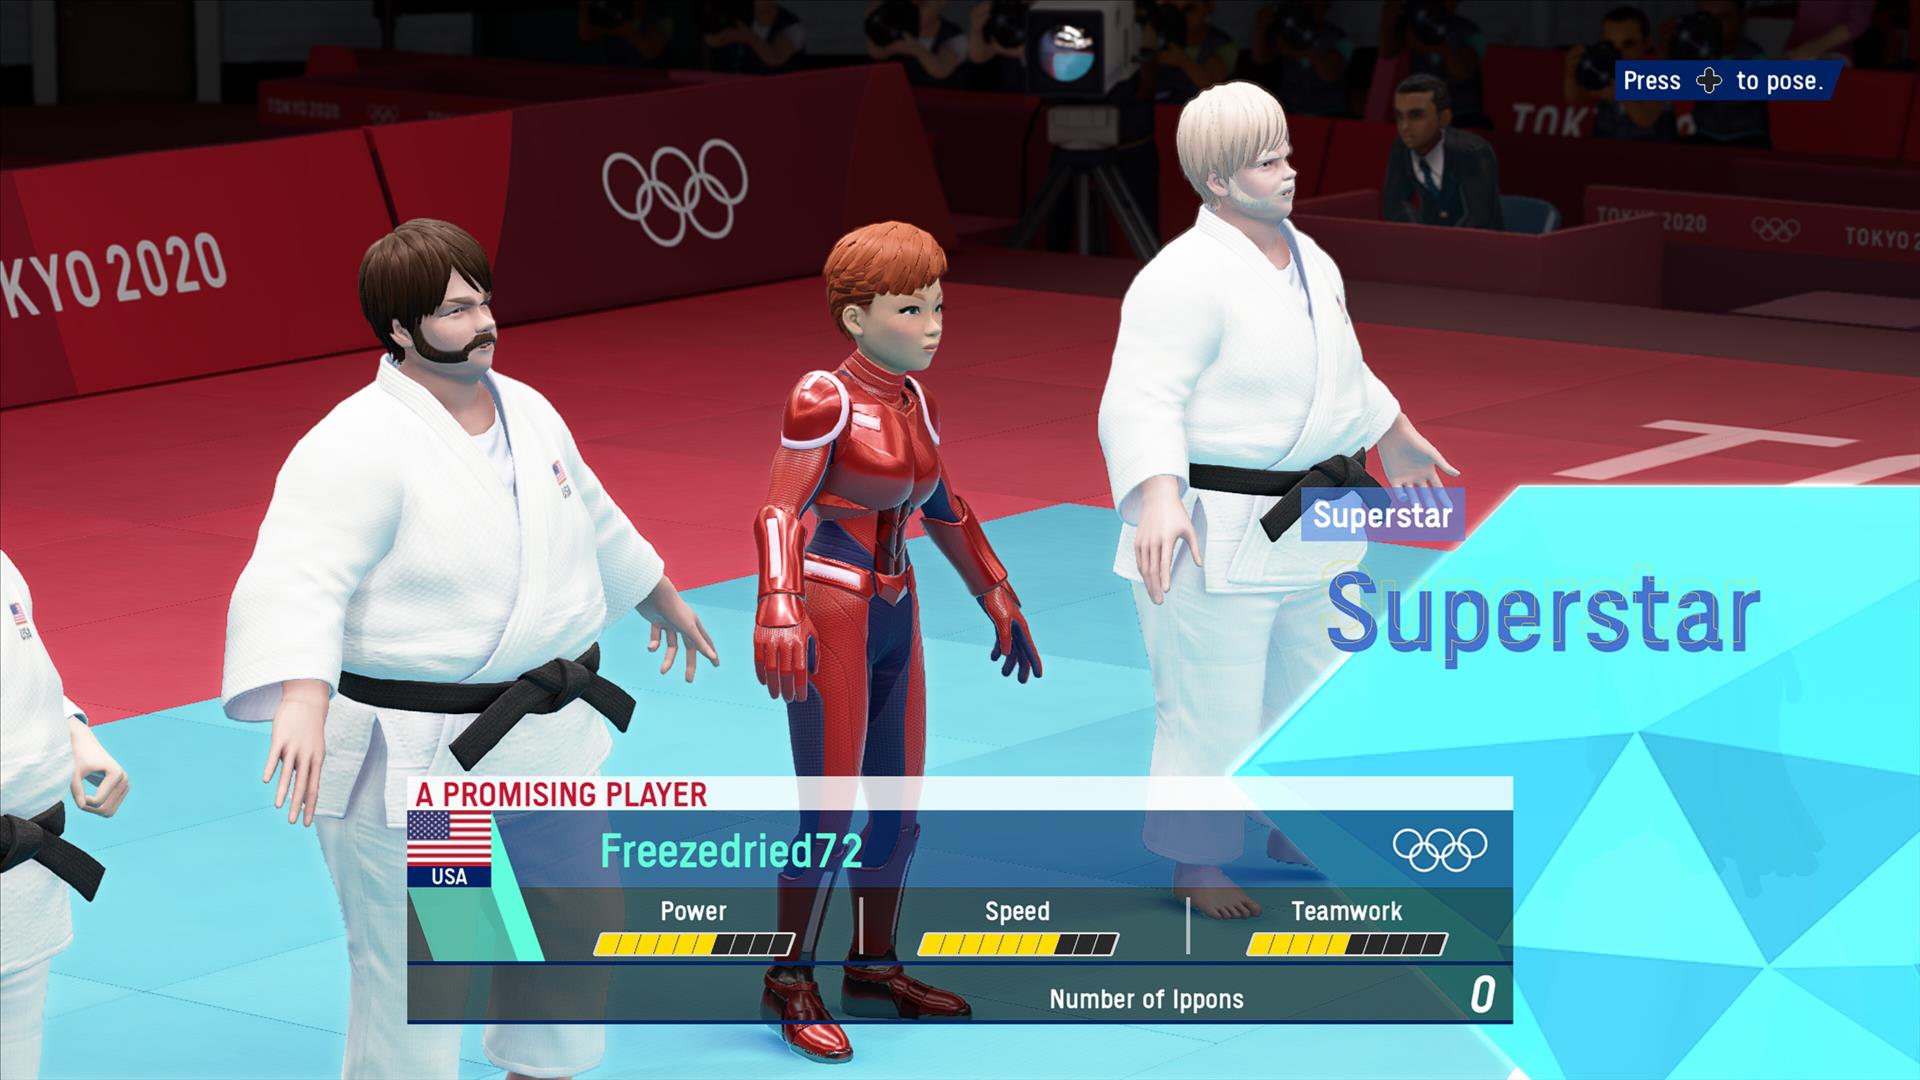 Olympic Games Tokyo 2020 – The Official Video Game Review